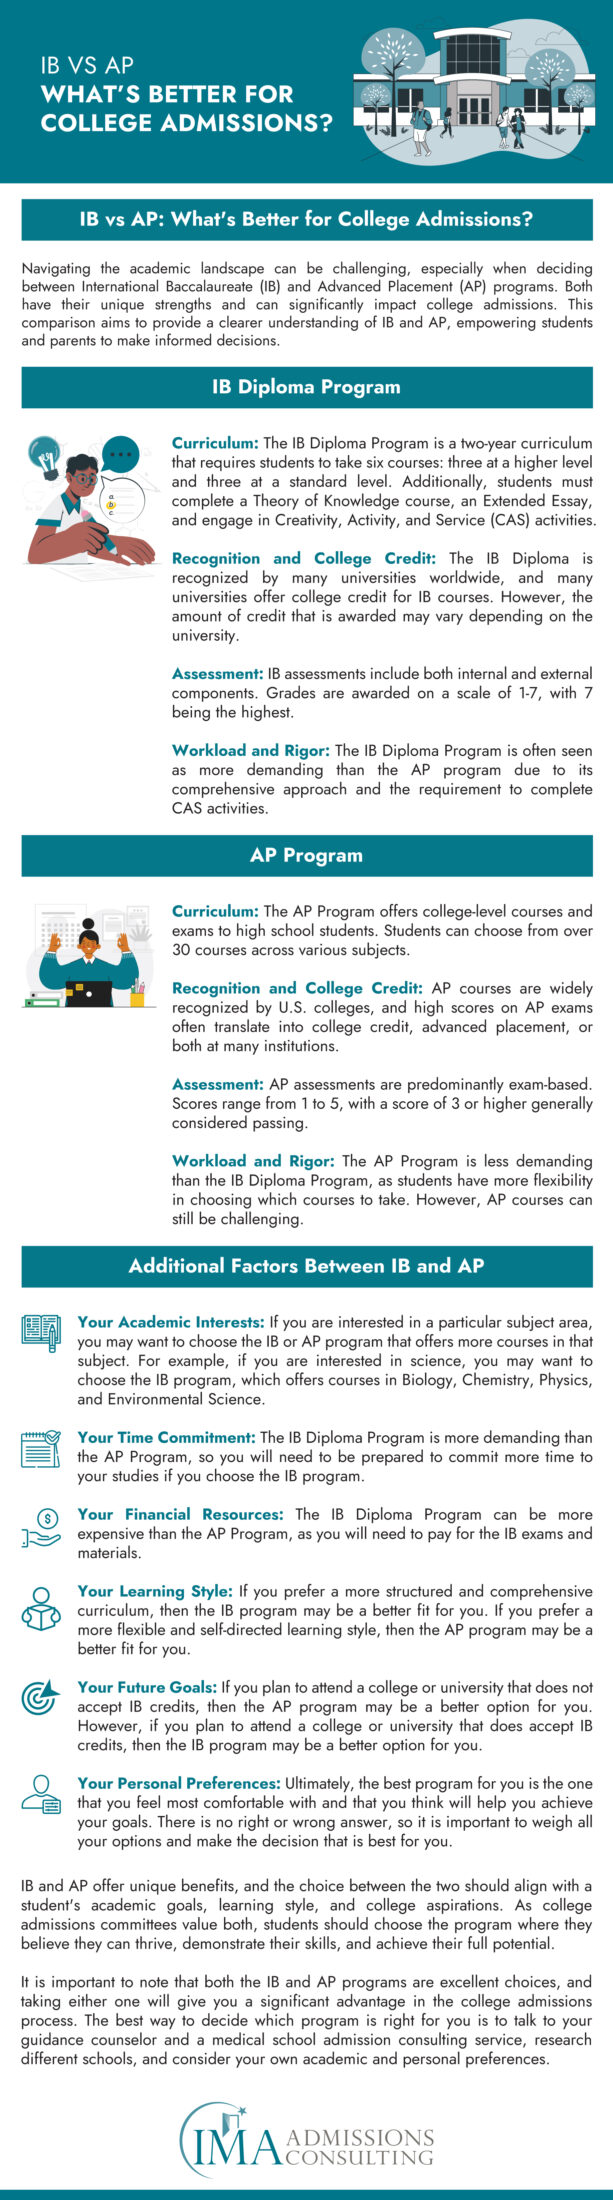 IB vs AP What's Better for College Admissions?